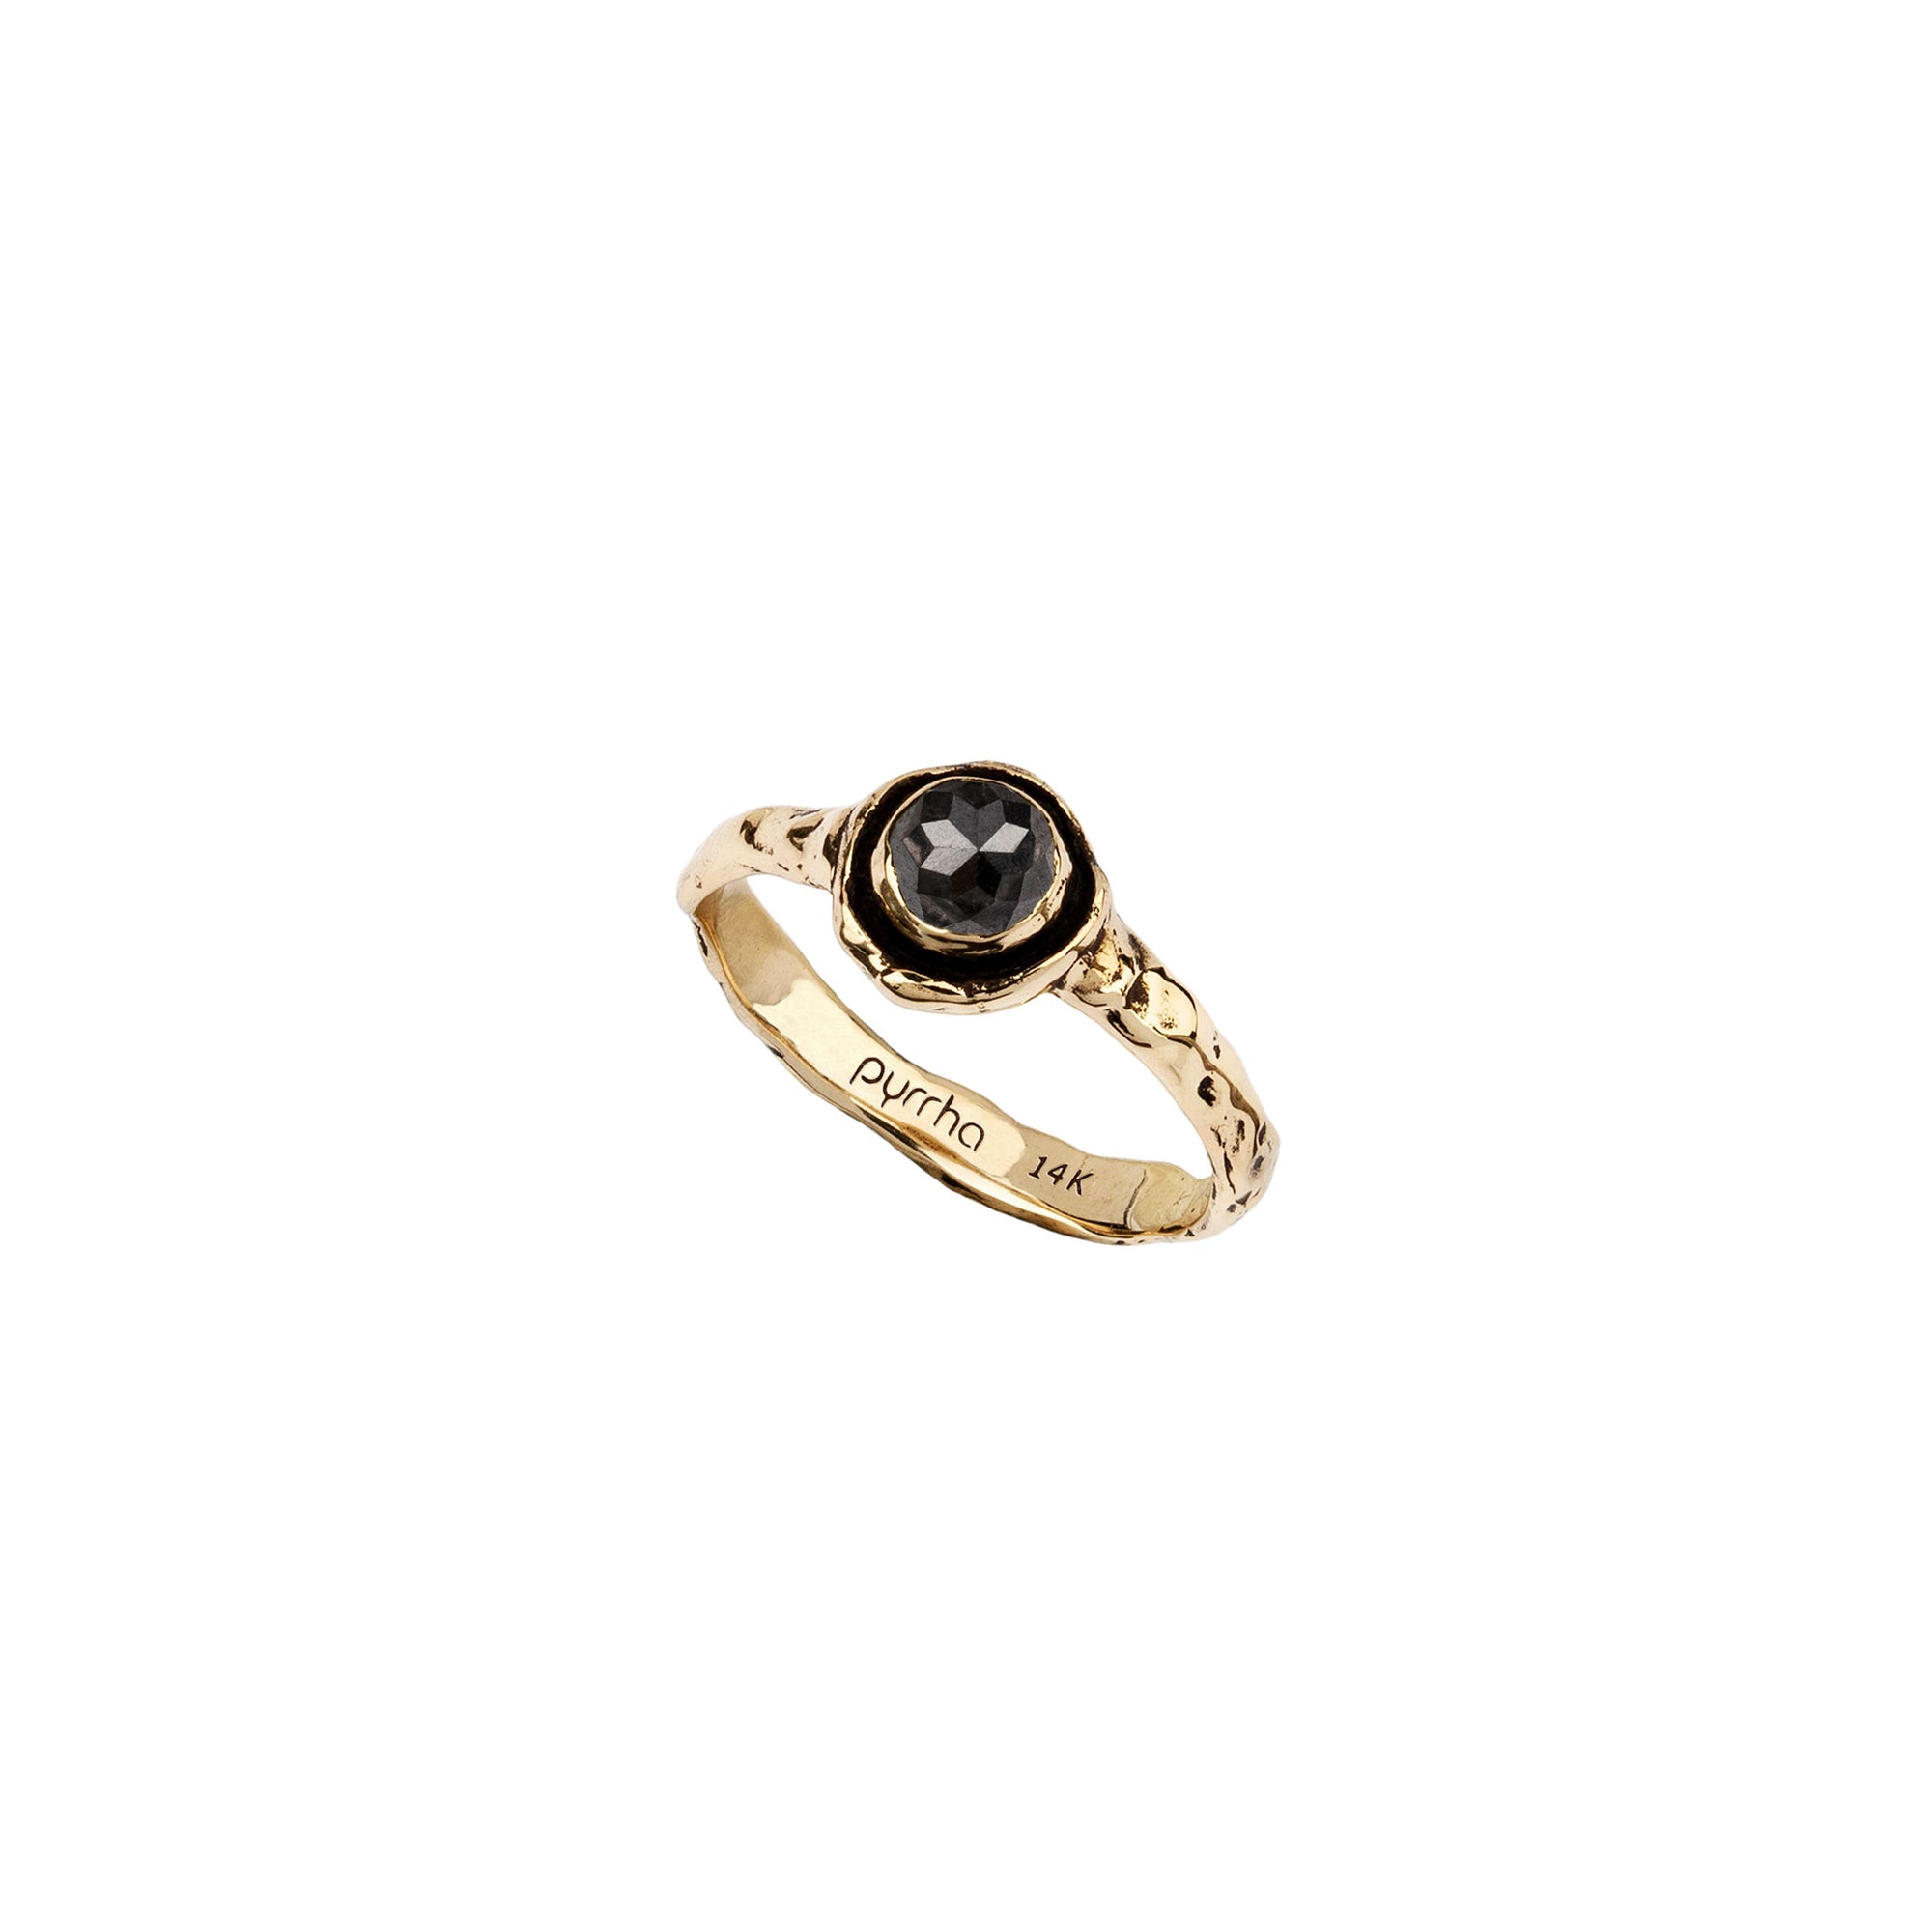 A narrow 14k gold ring set with a charcoal diamond.